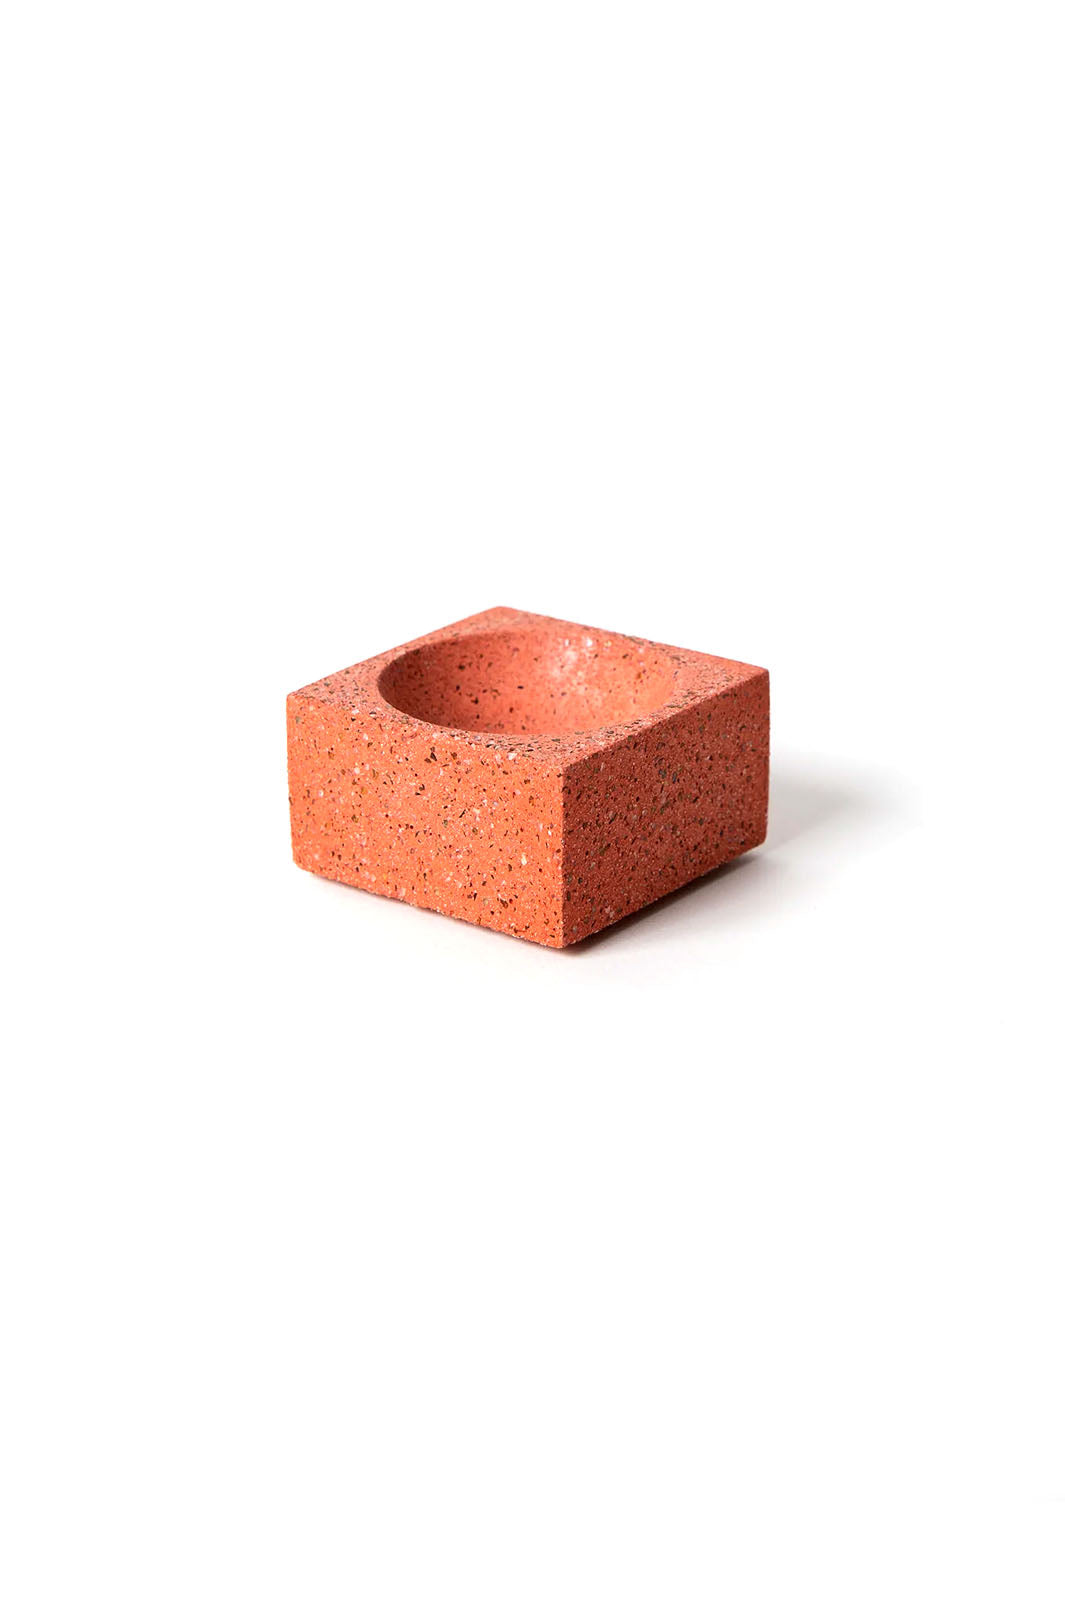 Coral concrete terrazzo square incense holder with a rounded inset center for the incense stick or cone